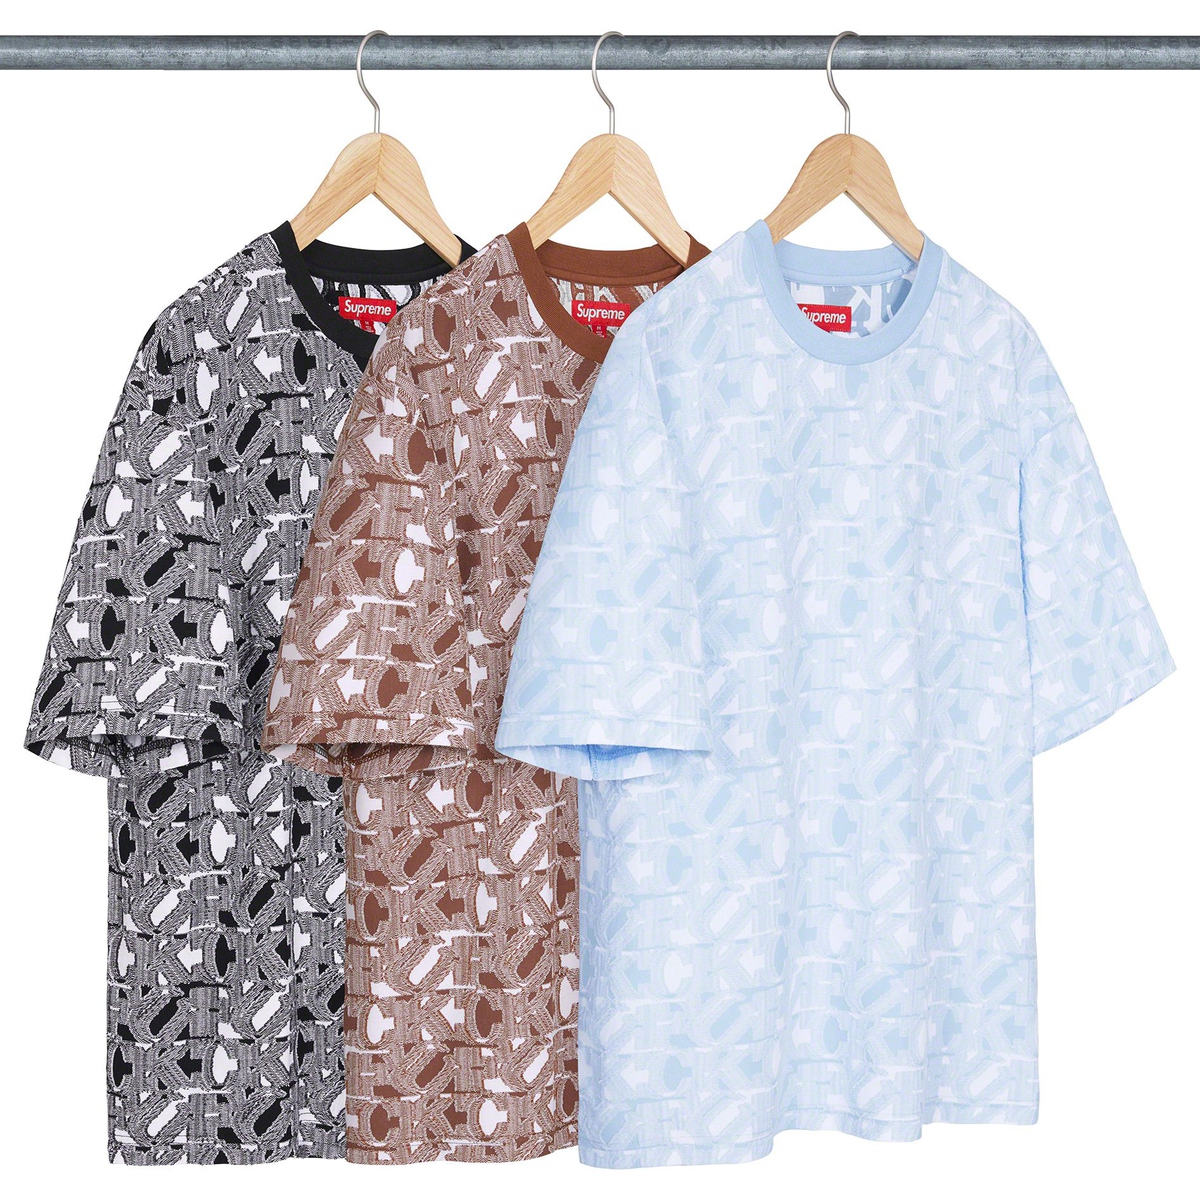 Supreme  left to drop during fall winter 23 season